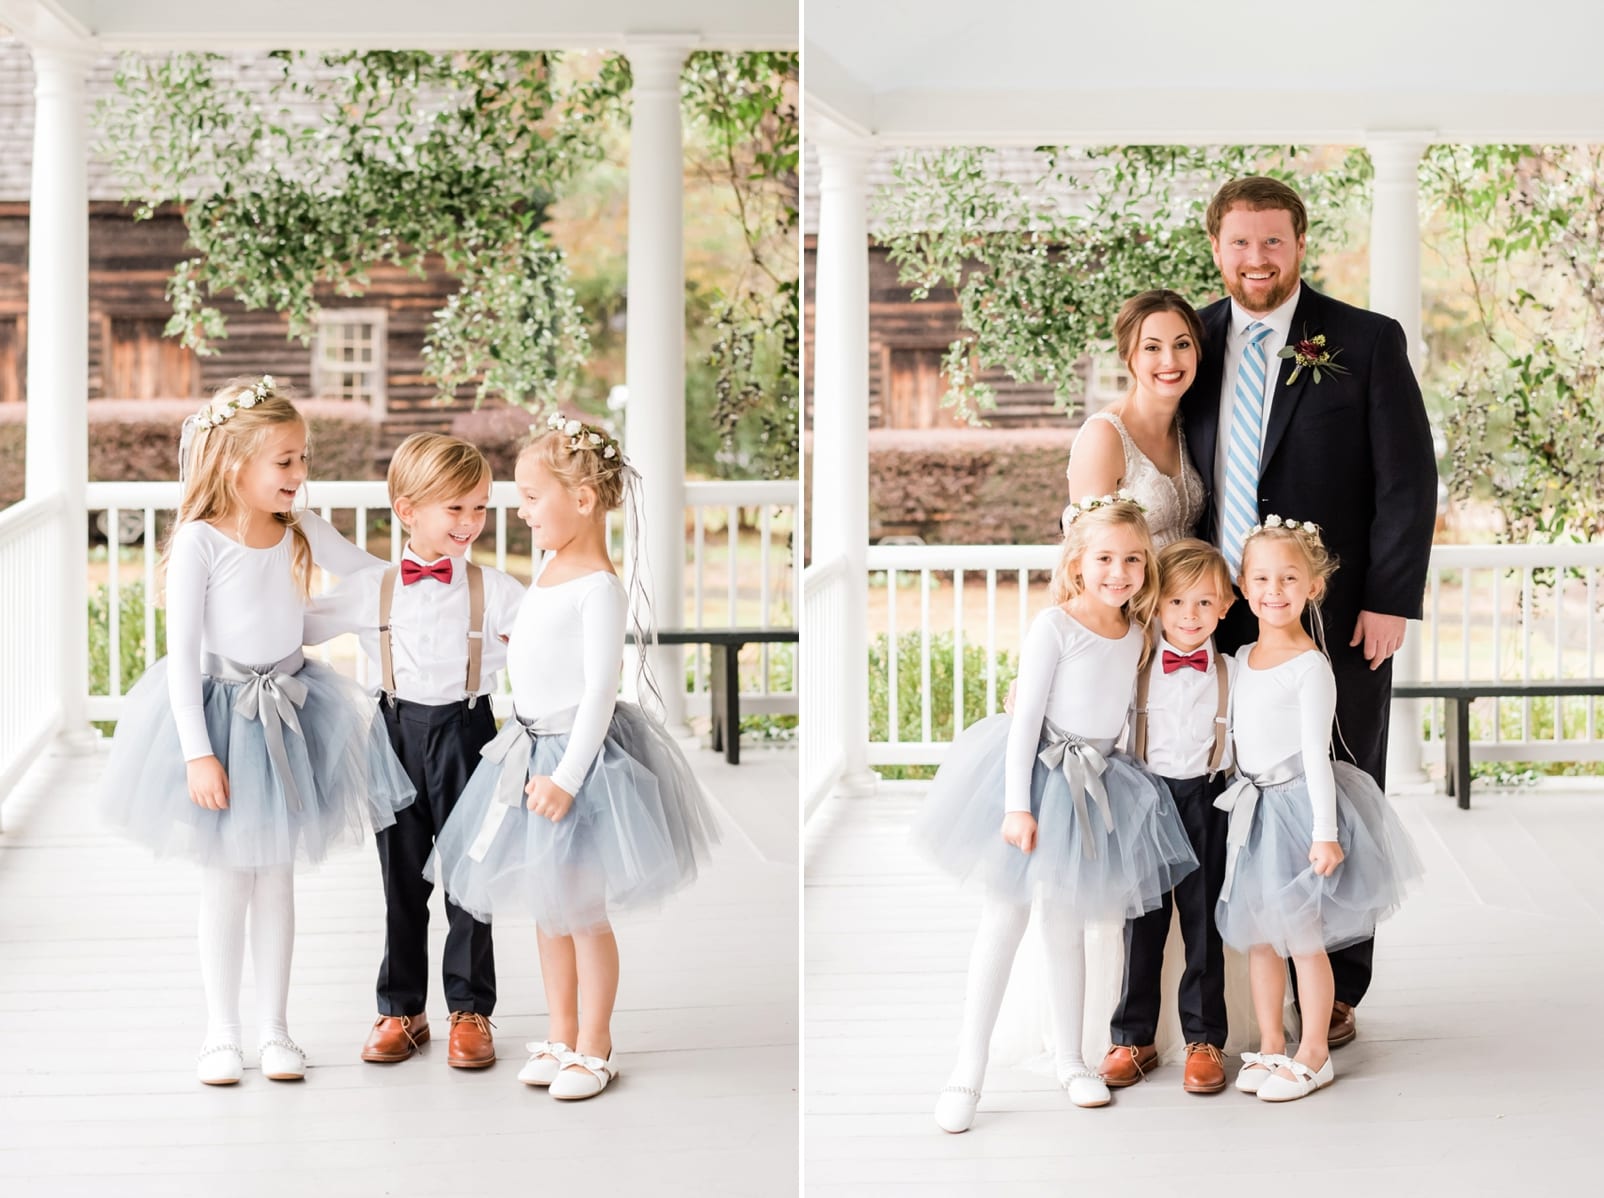 Sutherland Estate ring bear and flower girls together with the bride and groom on the front porch photo